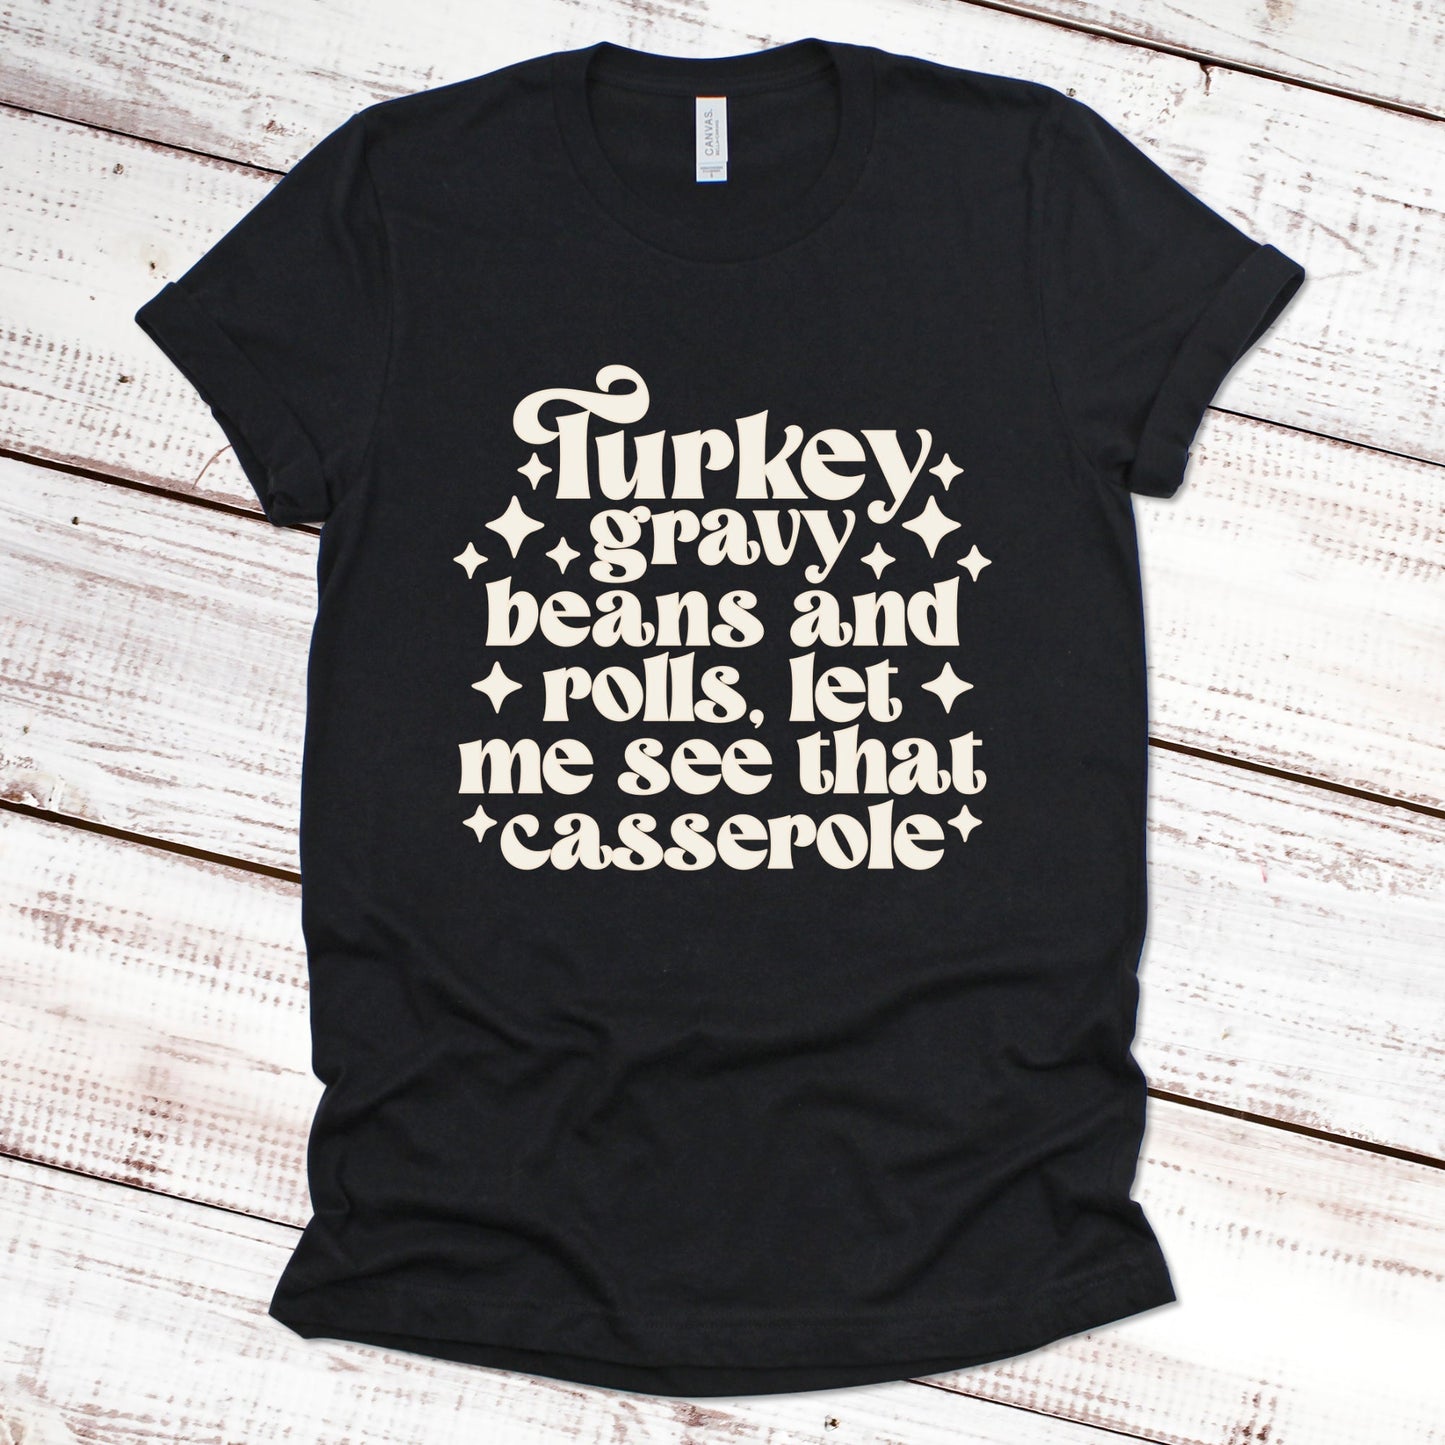 Turkey Gravy Beans and Rolls, Let Me See That Casserole Thanksgiving Shirt Great Giftables Black XS 